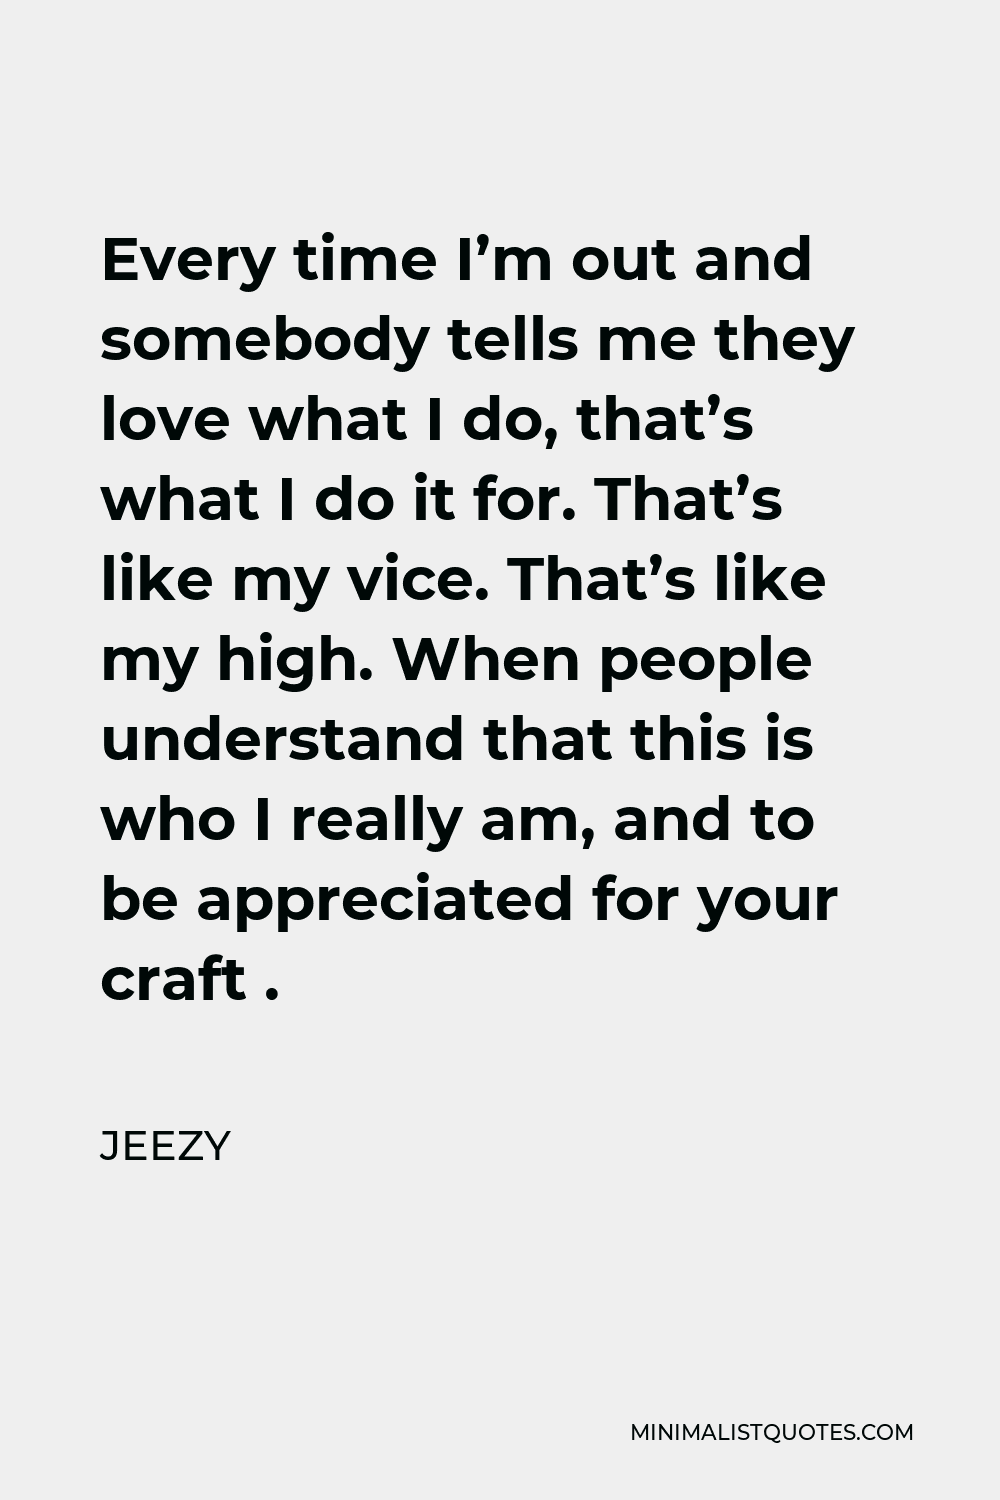 Jeezy Quote - Every time I’m out and somebody tells me they love what I do, that’s what I do it for. That’s like my vice. That’s like my high. When people understand that this is who I really am, and to be appreciated for your craft .